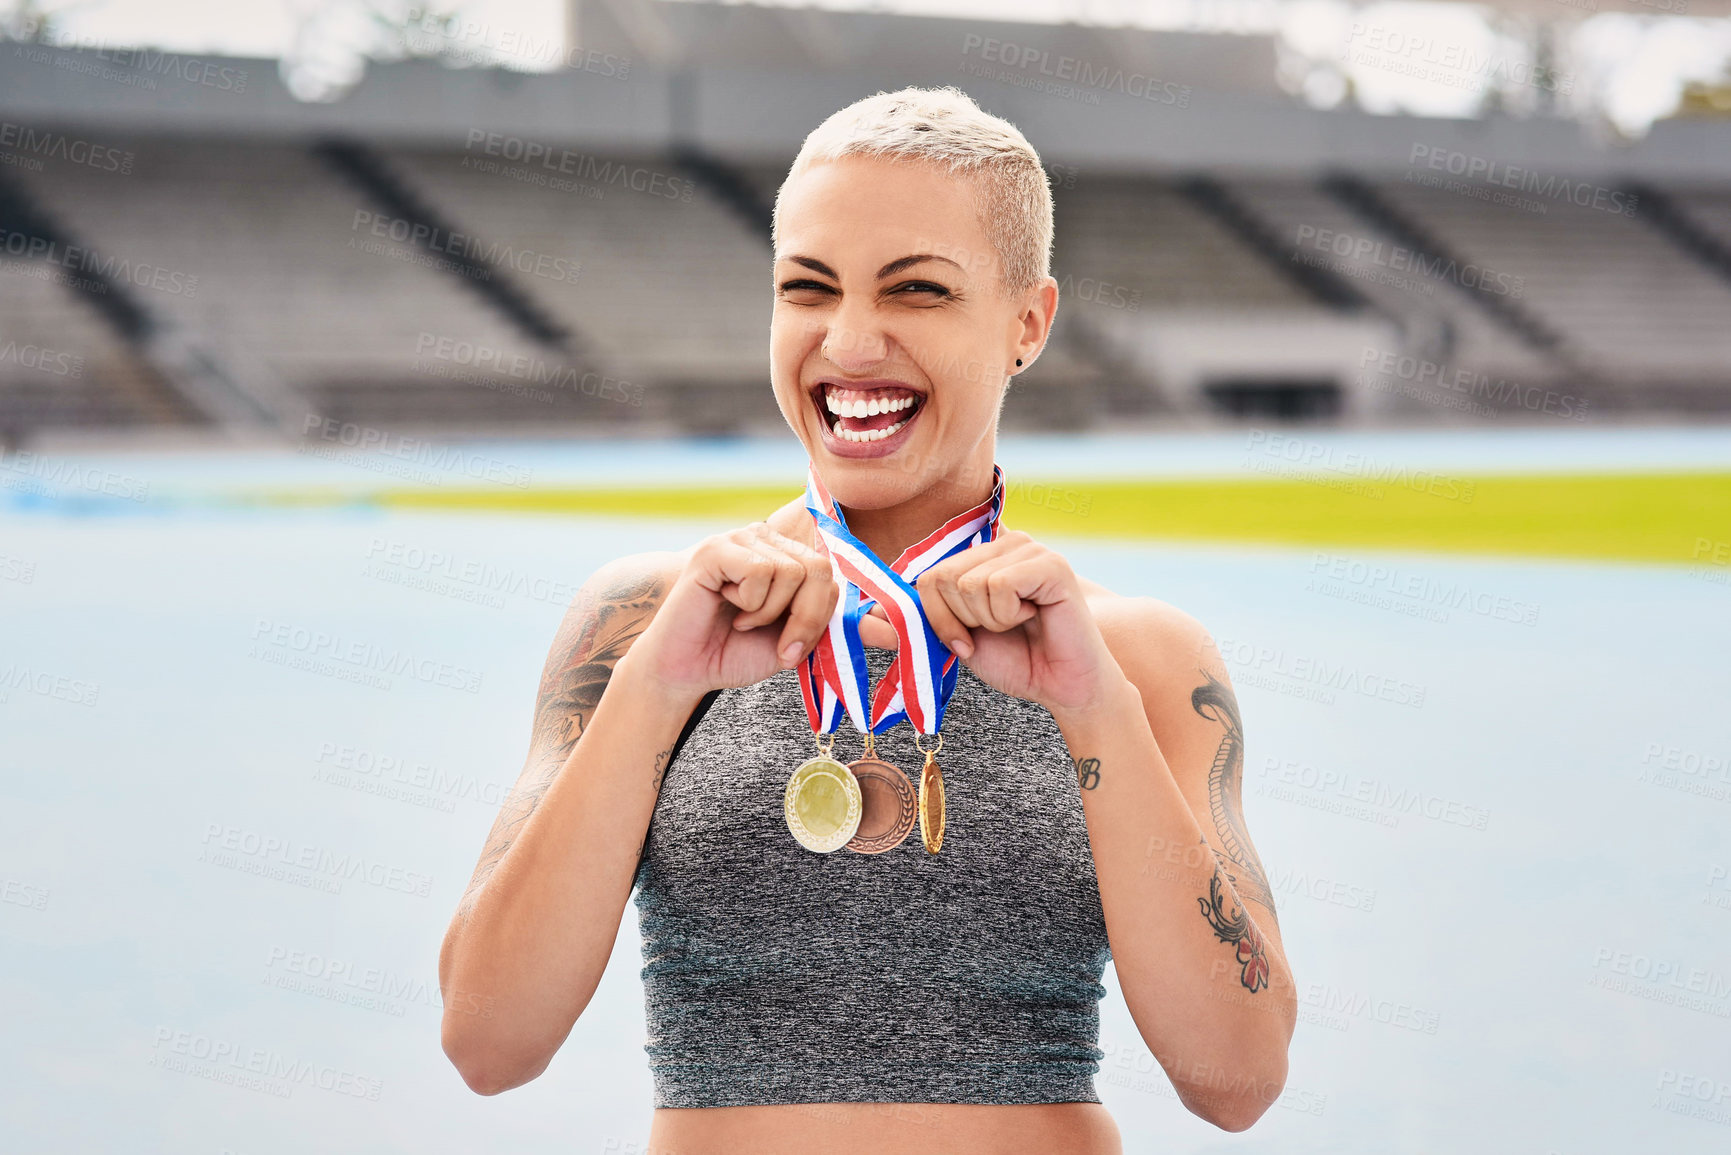 Buy stock photo Portrait, success medals and woman athlete at stadium after winning  race or sports event outdoors. Fitness, winner and female runner happy with victory, goals or target achievement on track field.